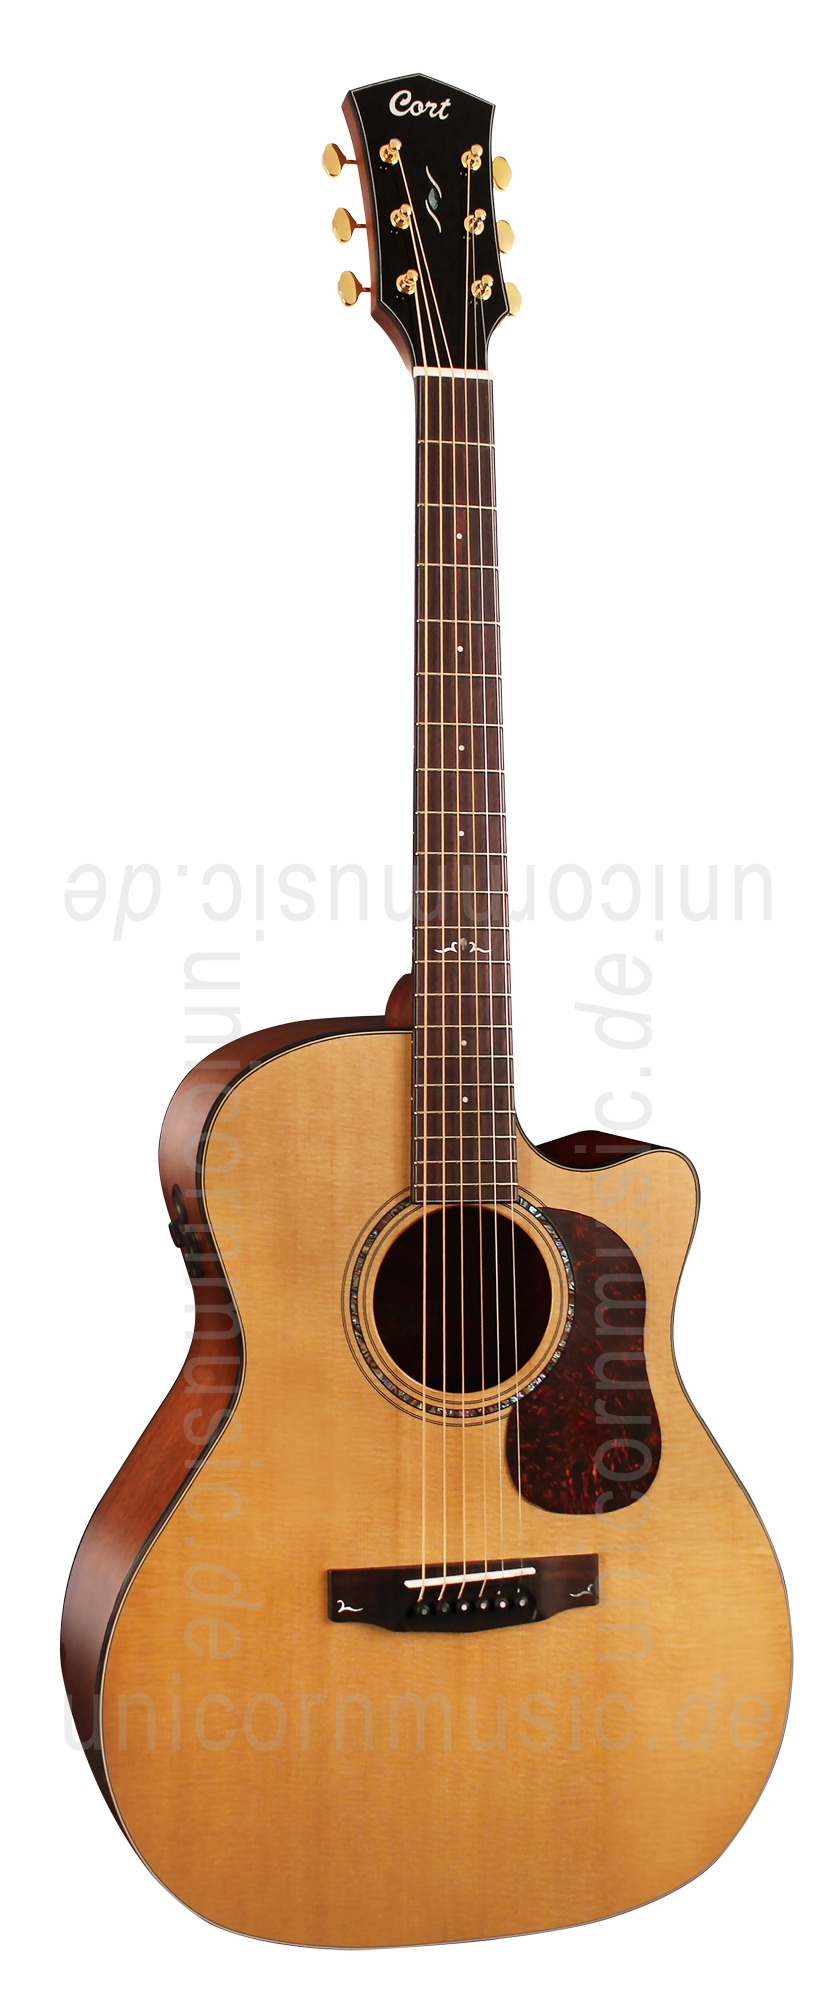 to article description / price Acoustic Guitar CORT Gold O6 - Auditorium- Fishman - Cutaway - solid spruce top